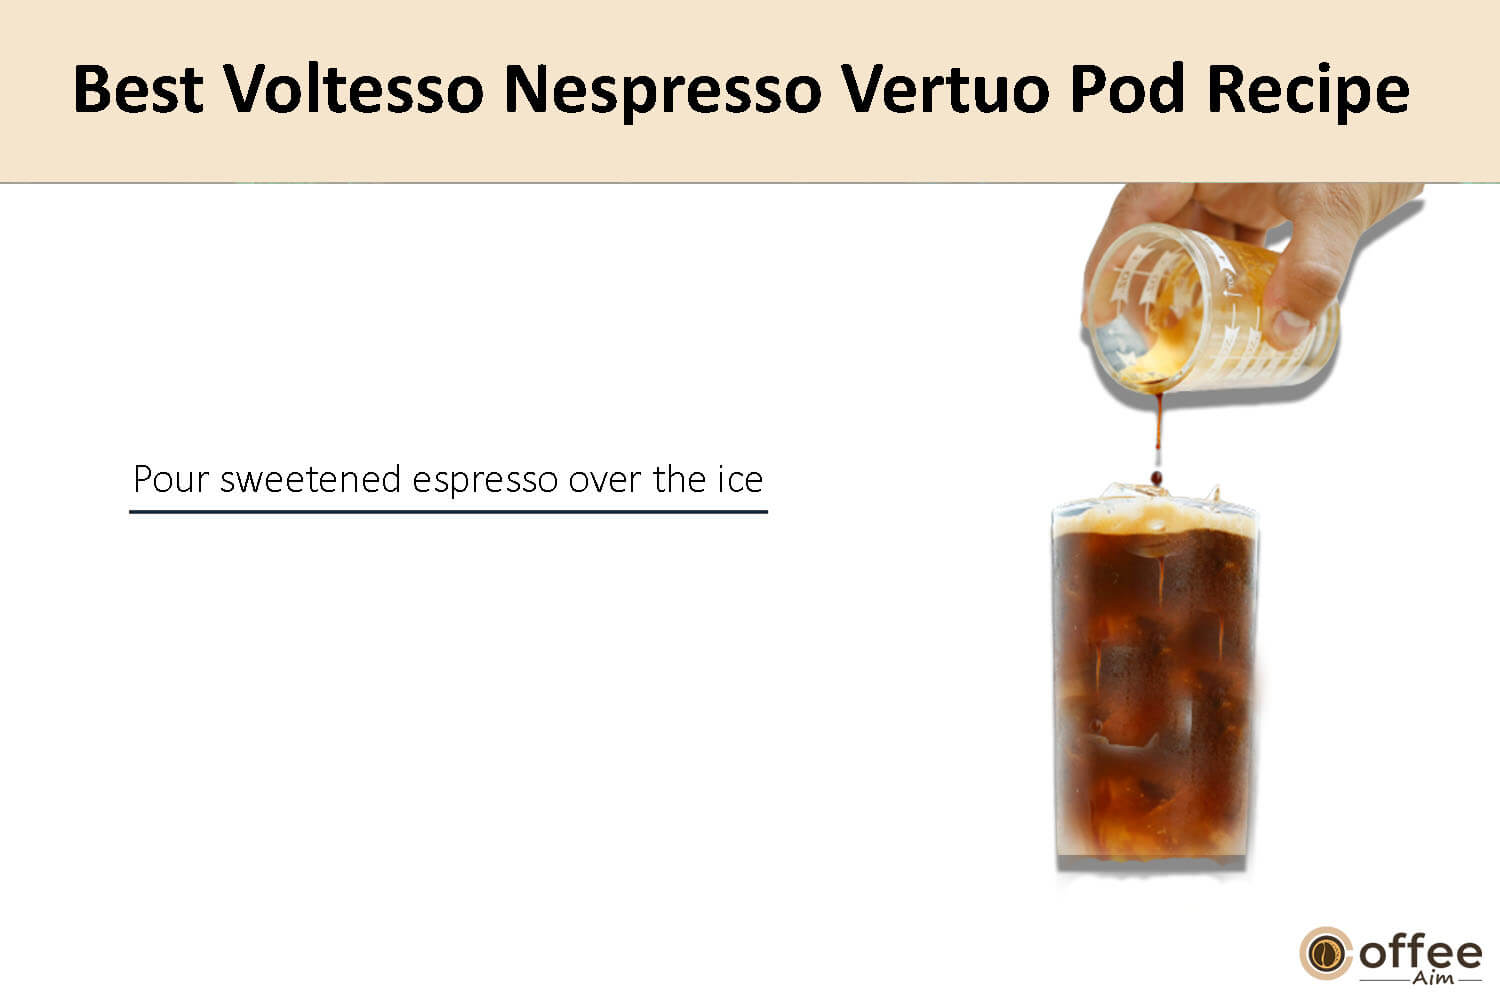 In this image, I clarify the preparation instructions for crafting the finest Voltesso Nespresso Vertuo coffee pod.